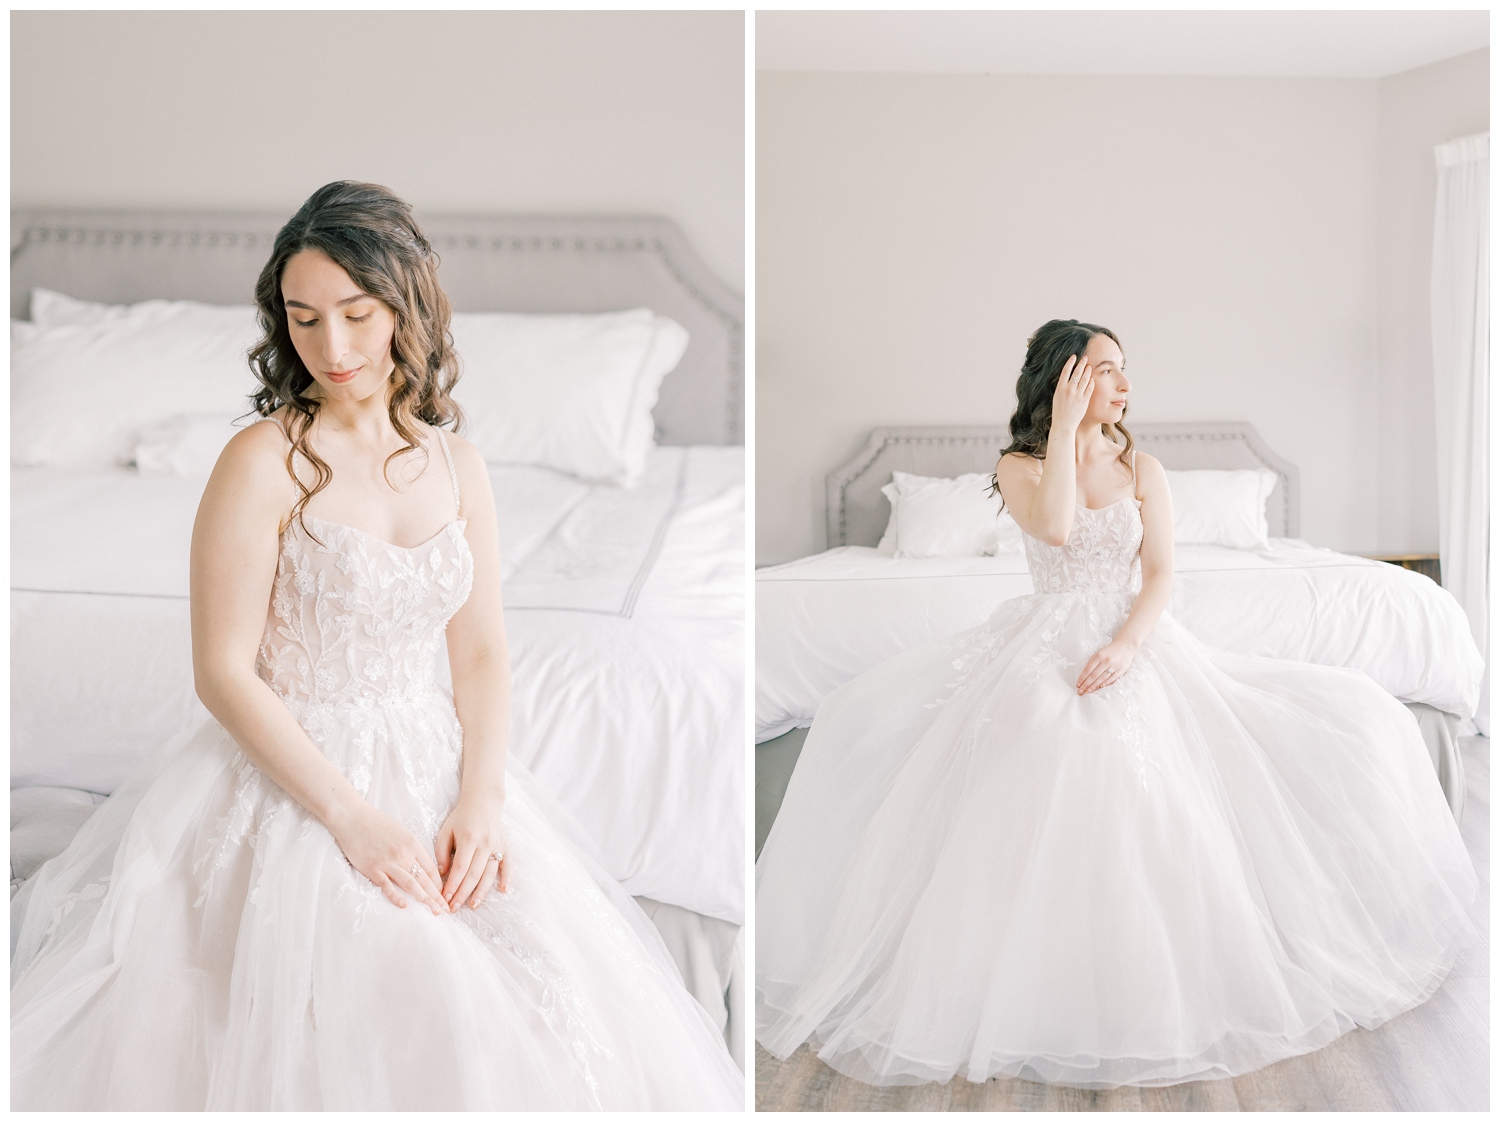 Elegant portraits of a bride in her getting ready room filled with natural light. Photographed in a light and airy style that looks like film at a venue in Upstate NY called Windham Manor.
